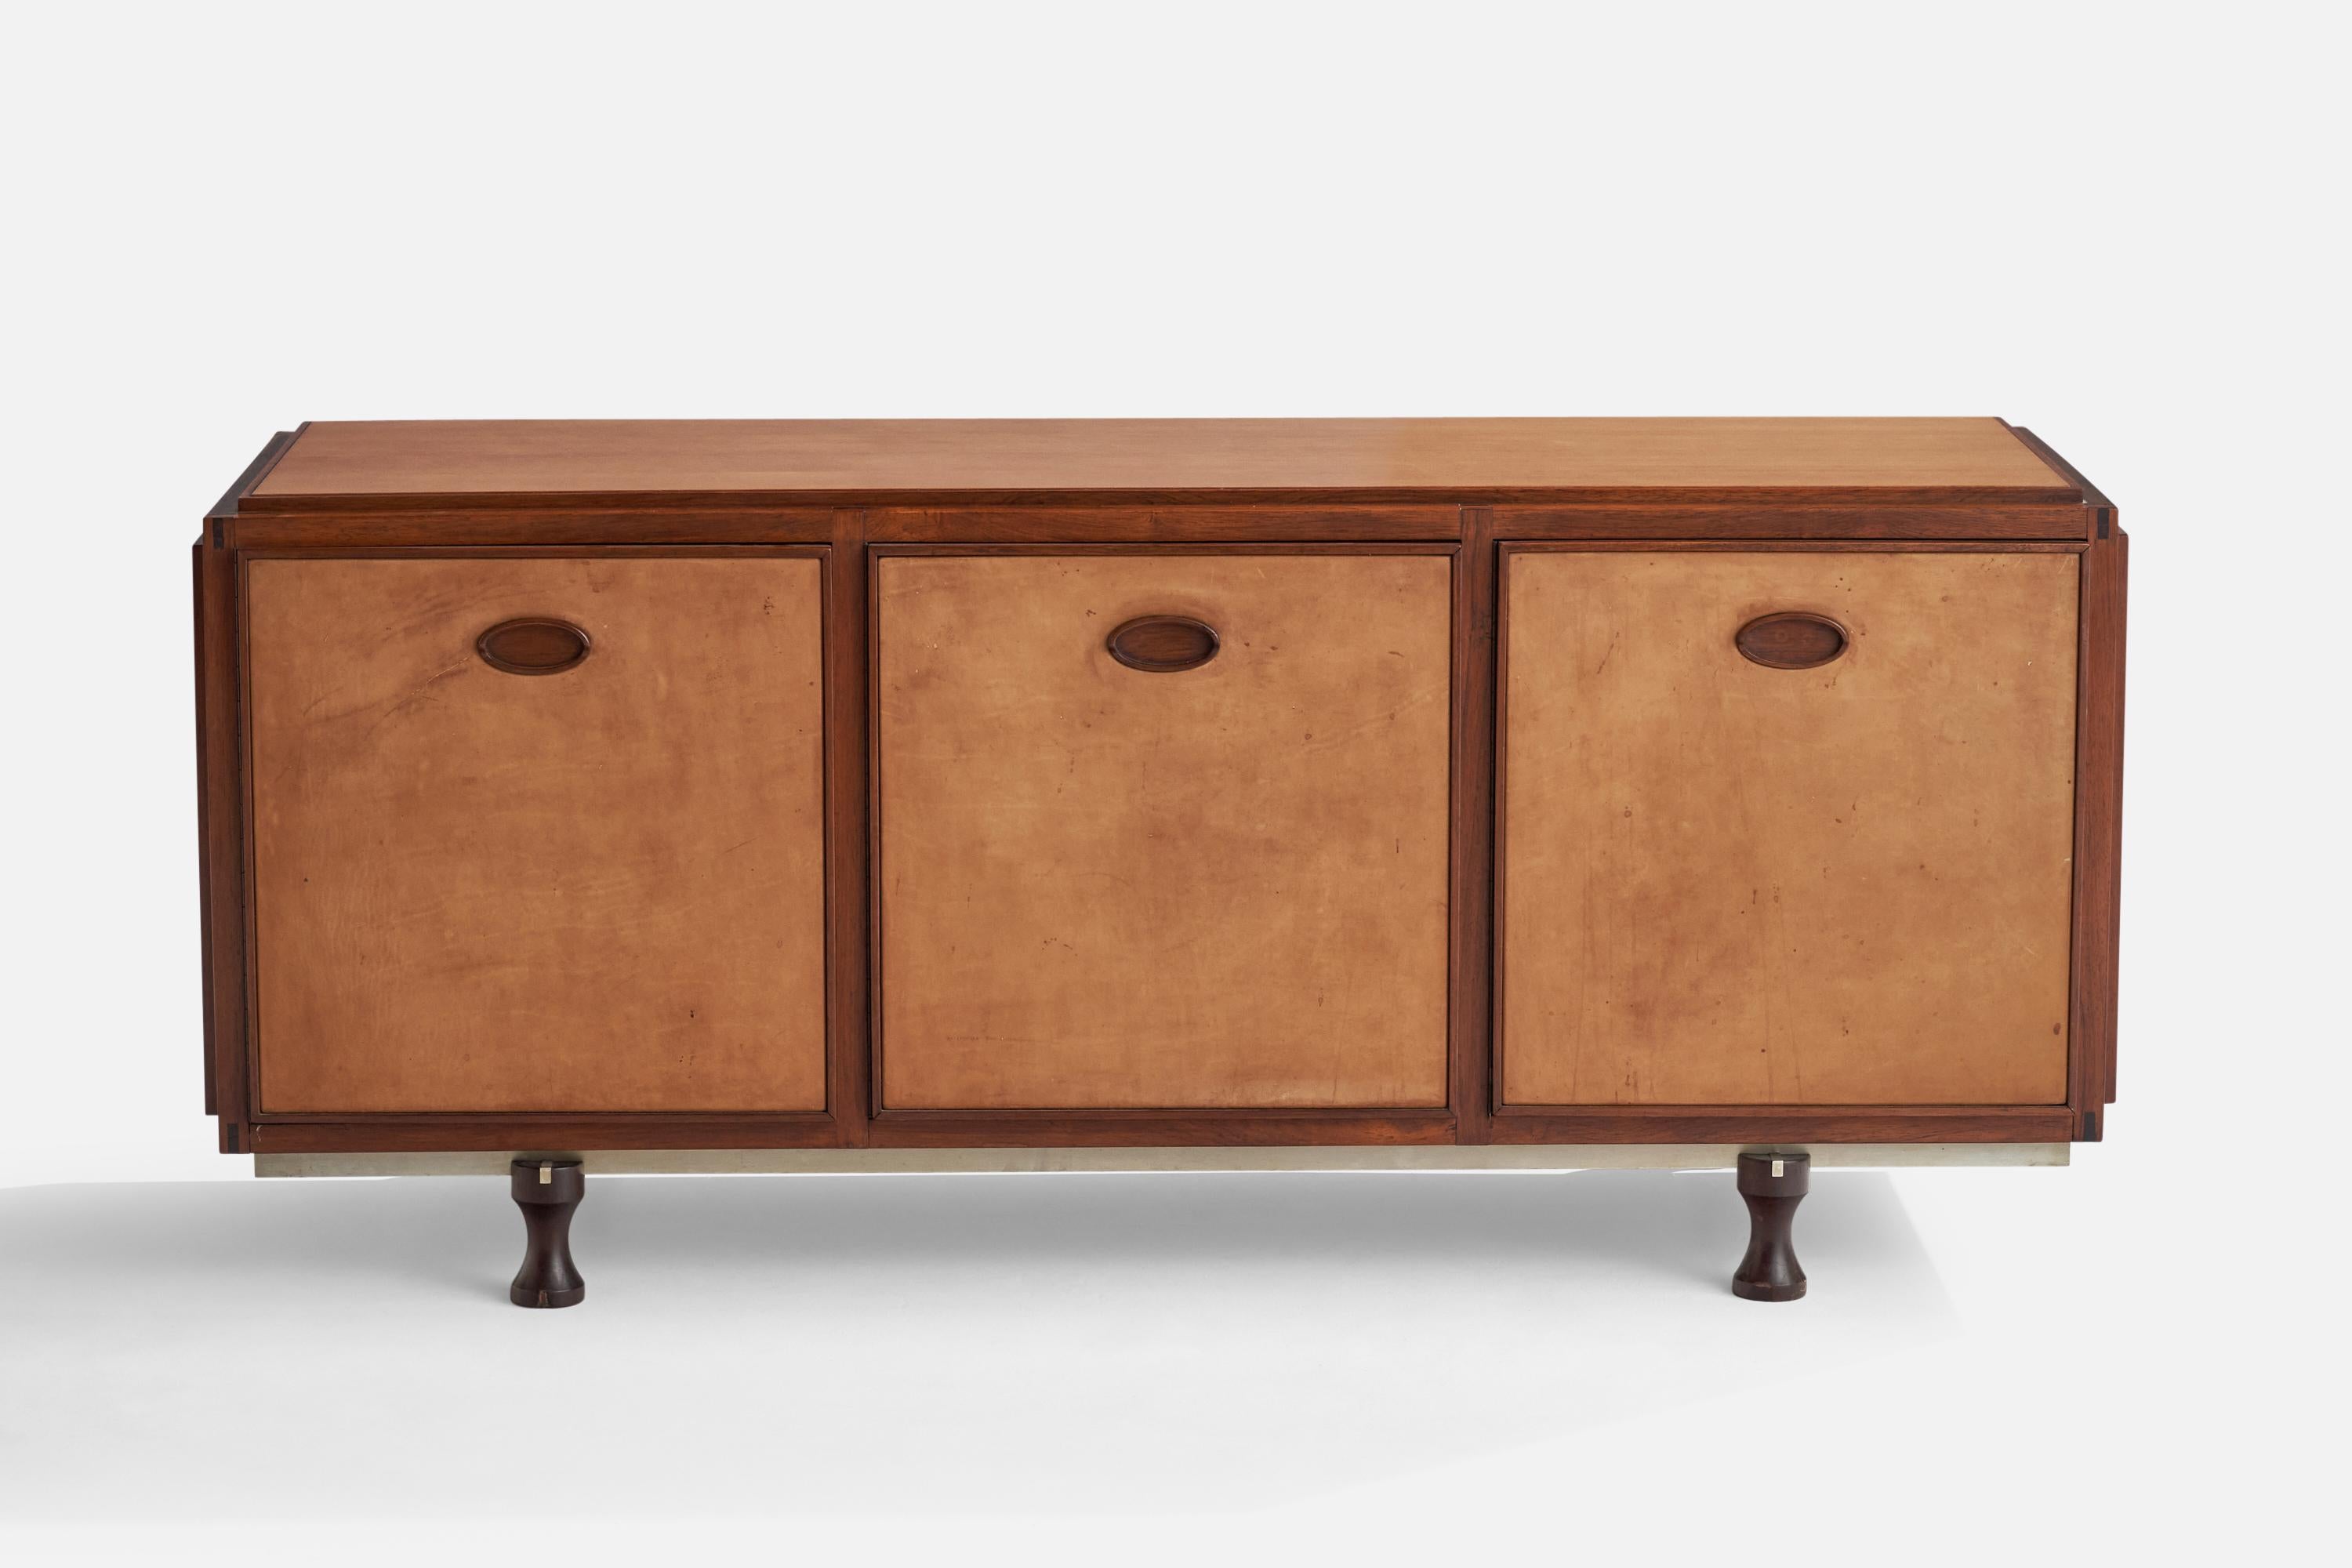 Italian Gianfranco Frattini, Unique Sideboard, Rosewood, Leather, Steel, Italy, 1950s For Sale